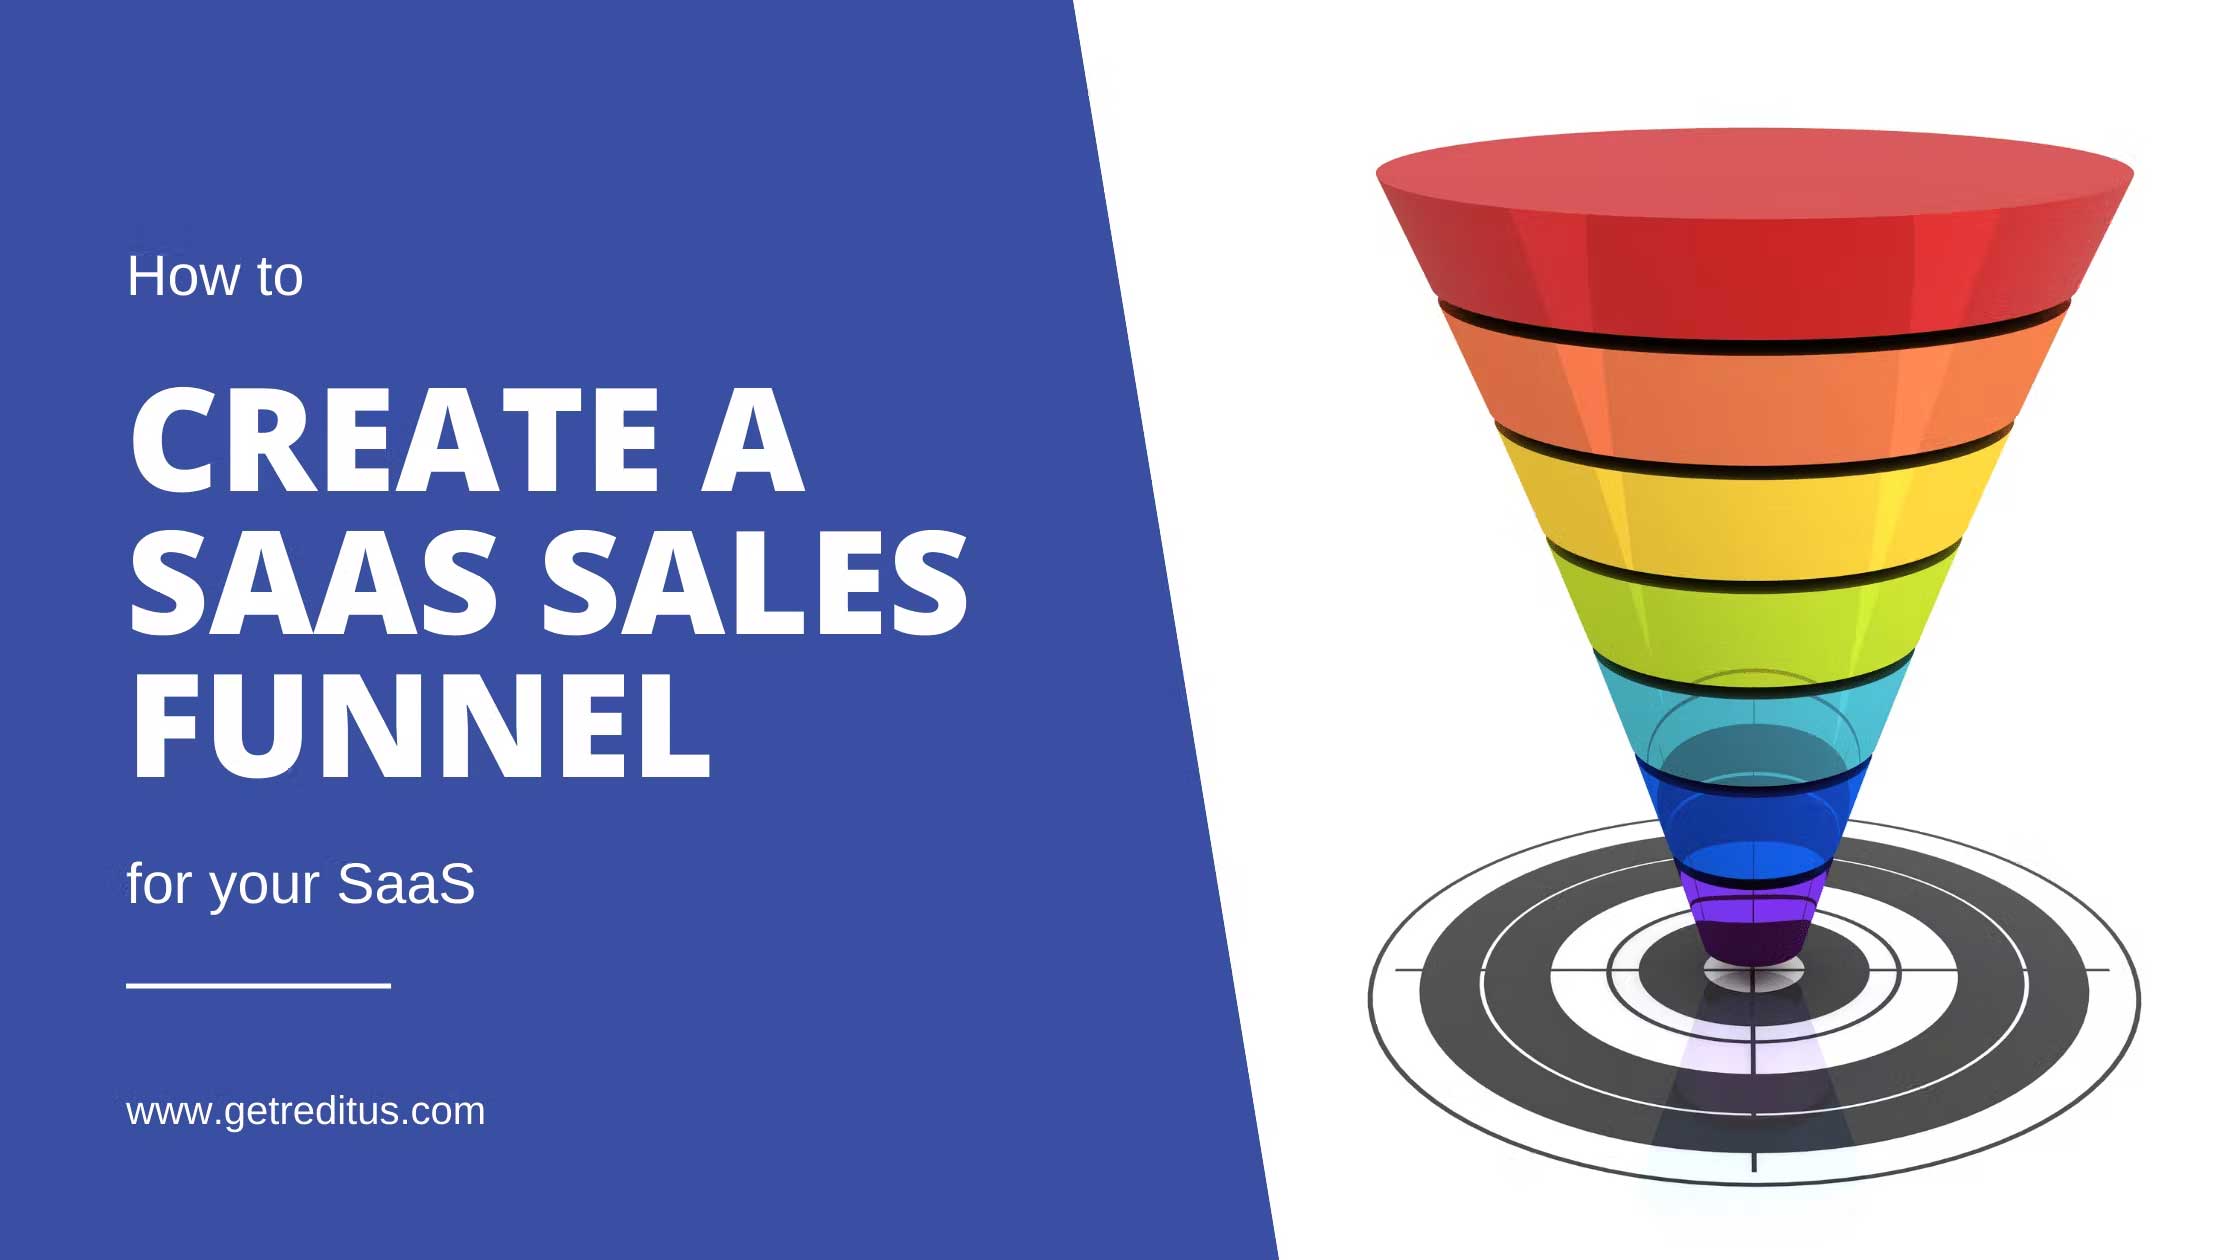 How to Properly Create a SaaS Sales Funnel